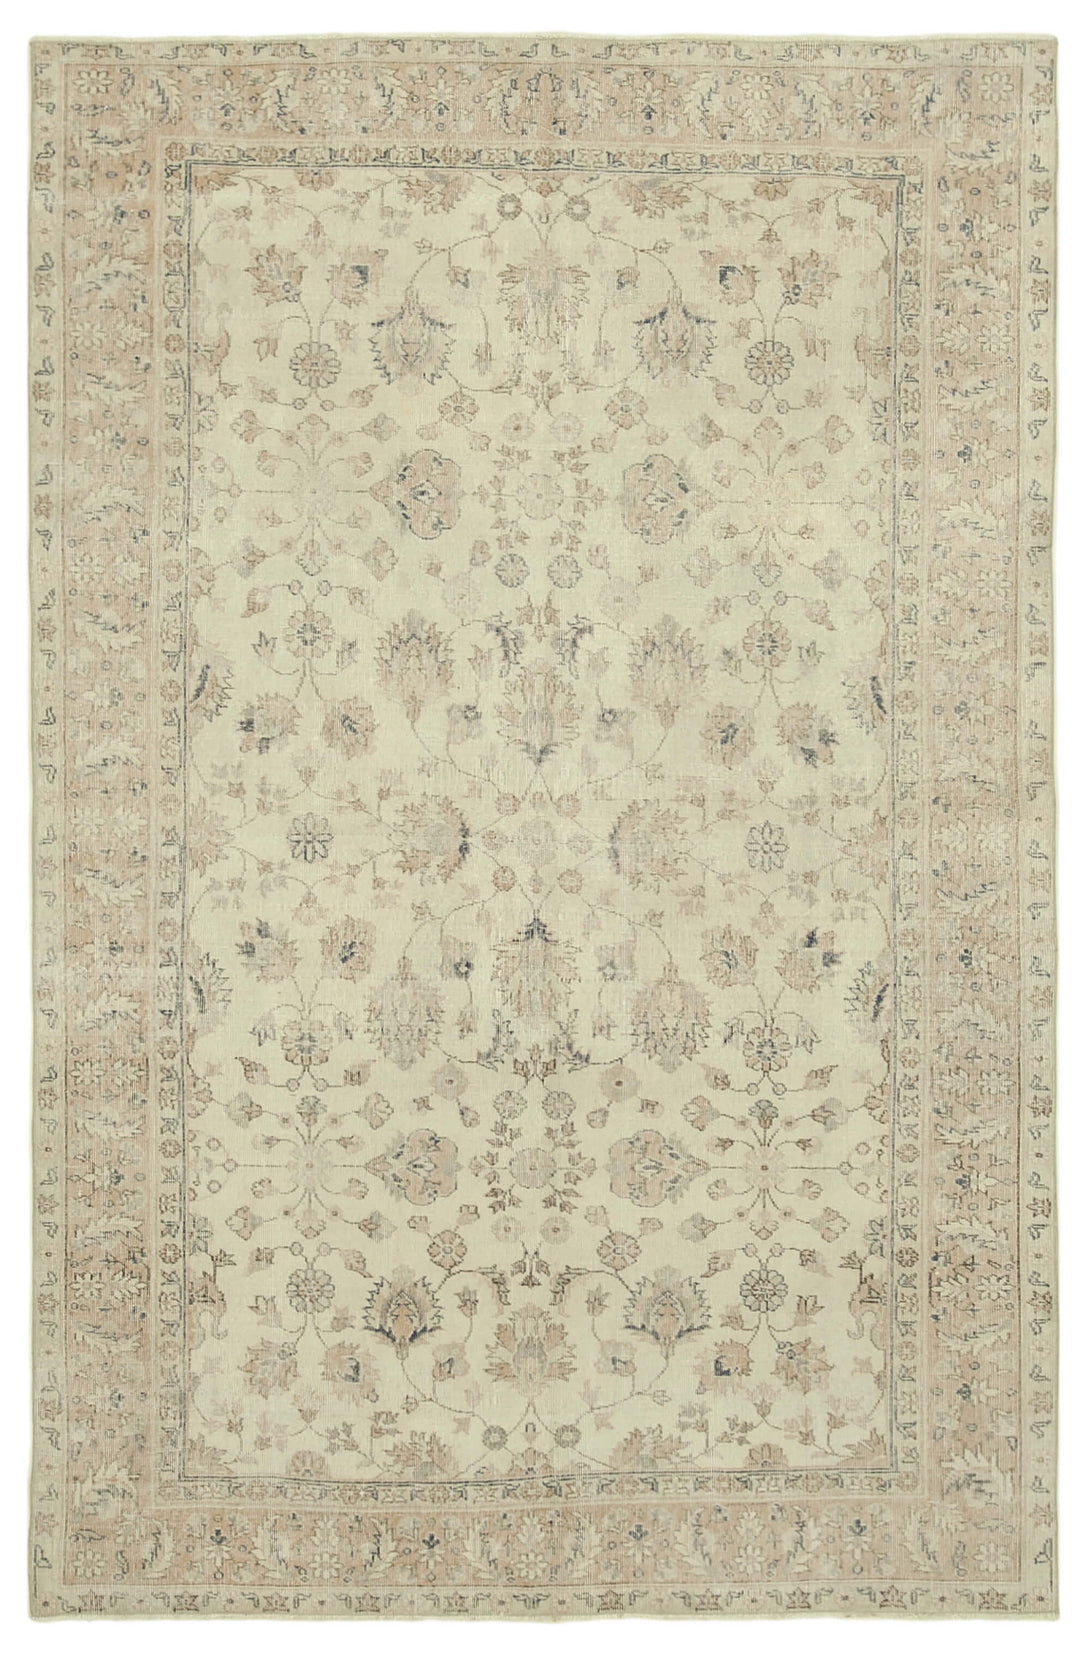 Handmade White Wash Area Rug > Design# OL-AC-38938 > Size: 6'-6" x 9'-11", Carpet Culture Rugs, Handmade Rugs, NYC Rugs, New Rugs, Shop Rugs, Rug Store, Outlet Rugs, SoHo Rugs, Rugs in USA